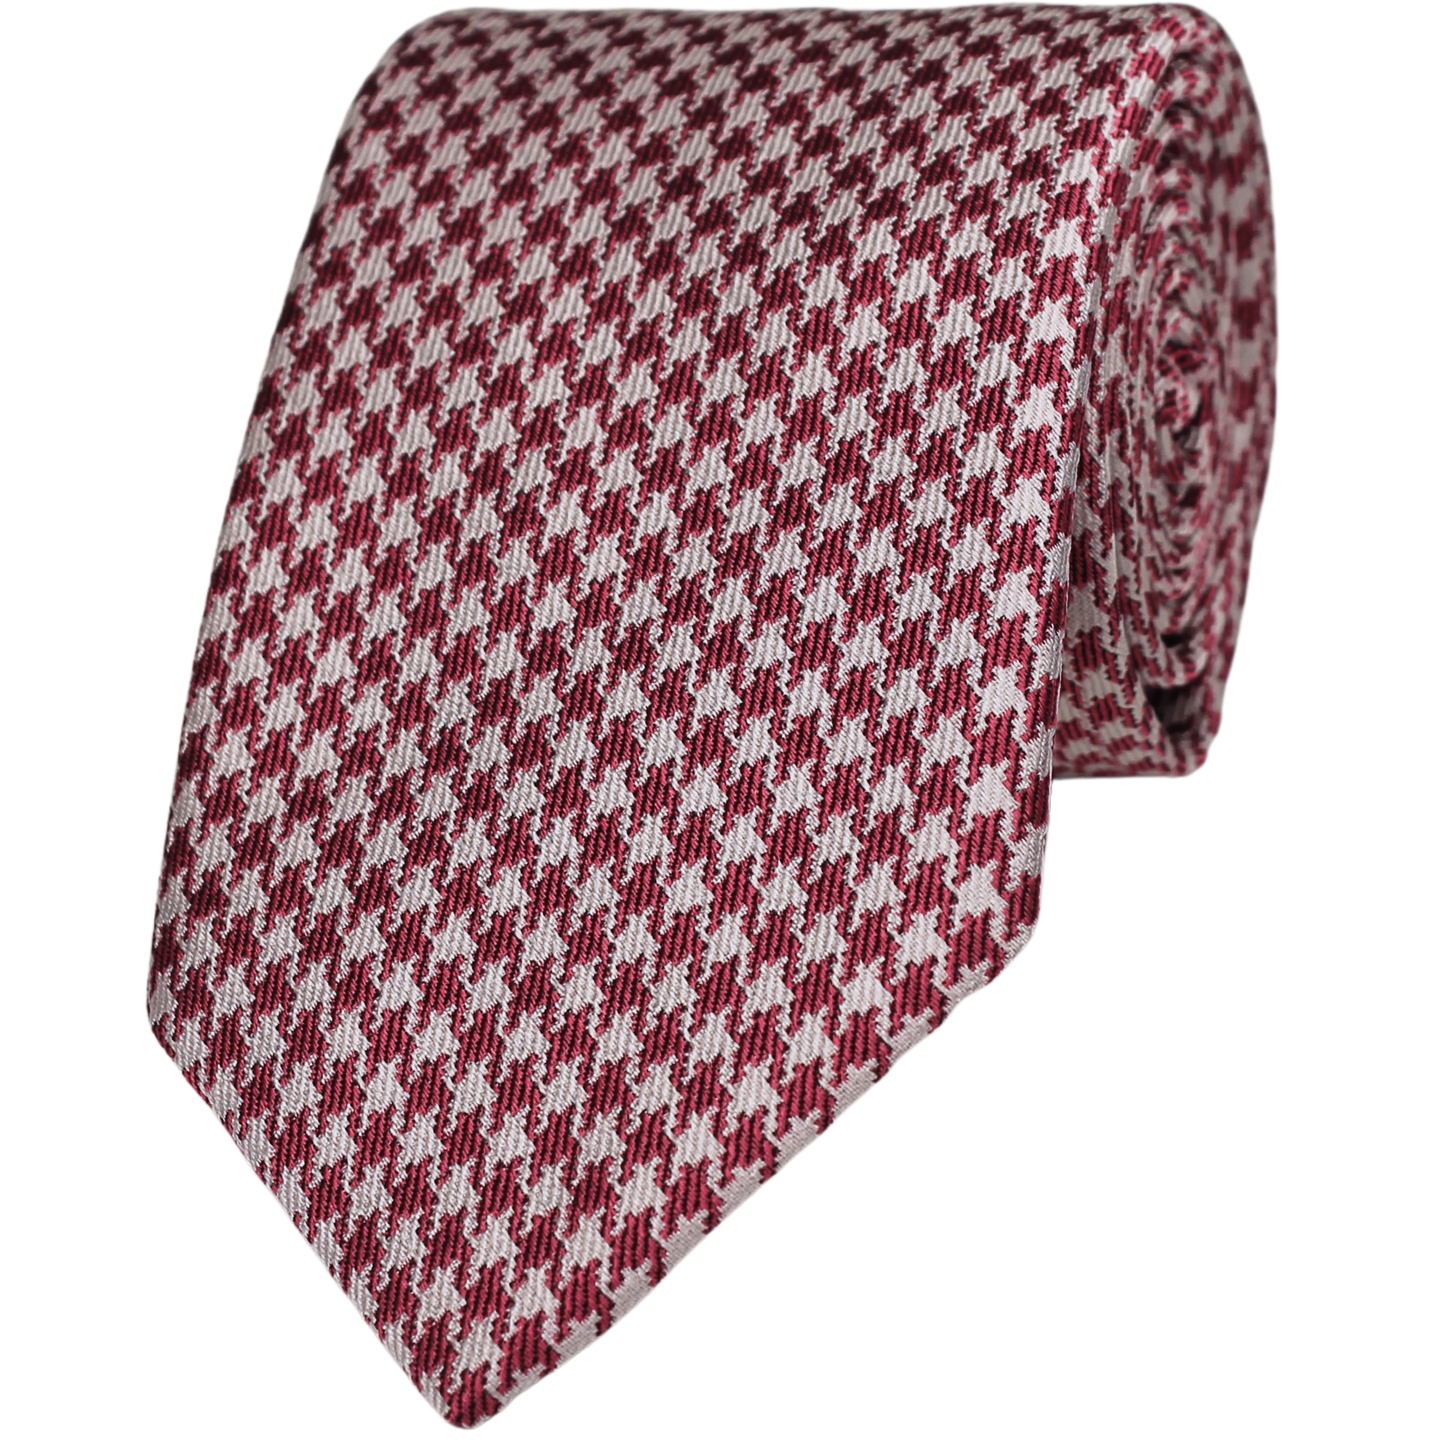 Pink Woven Houndstooth